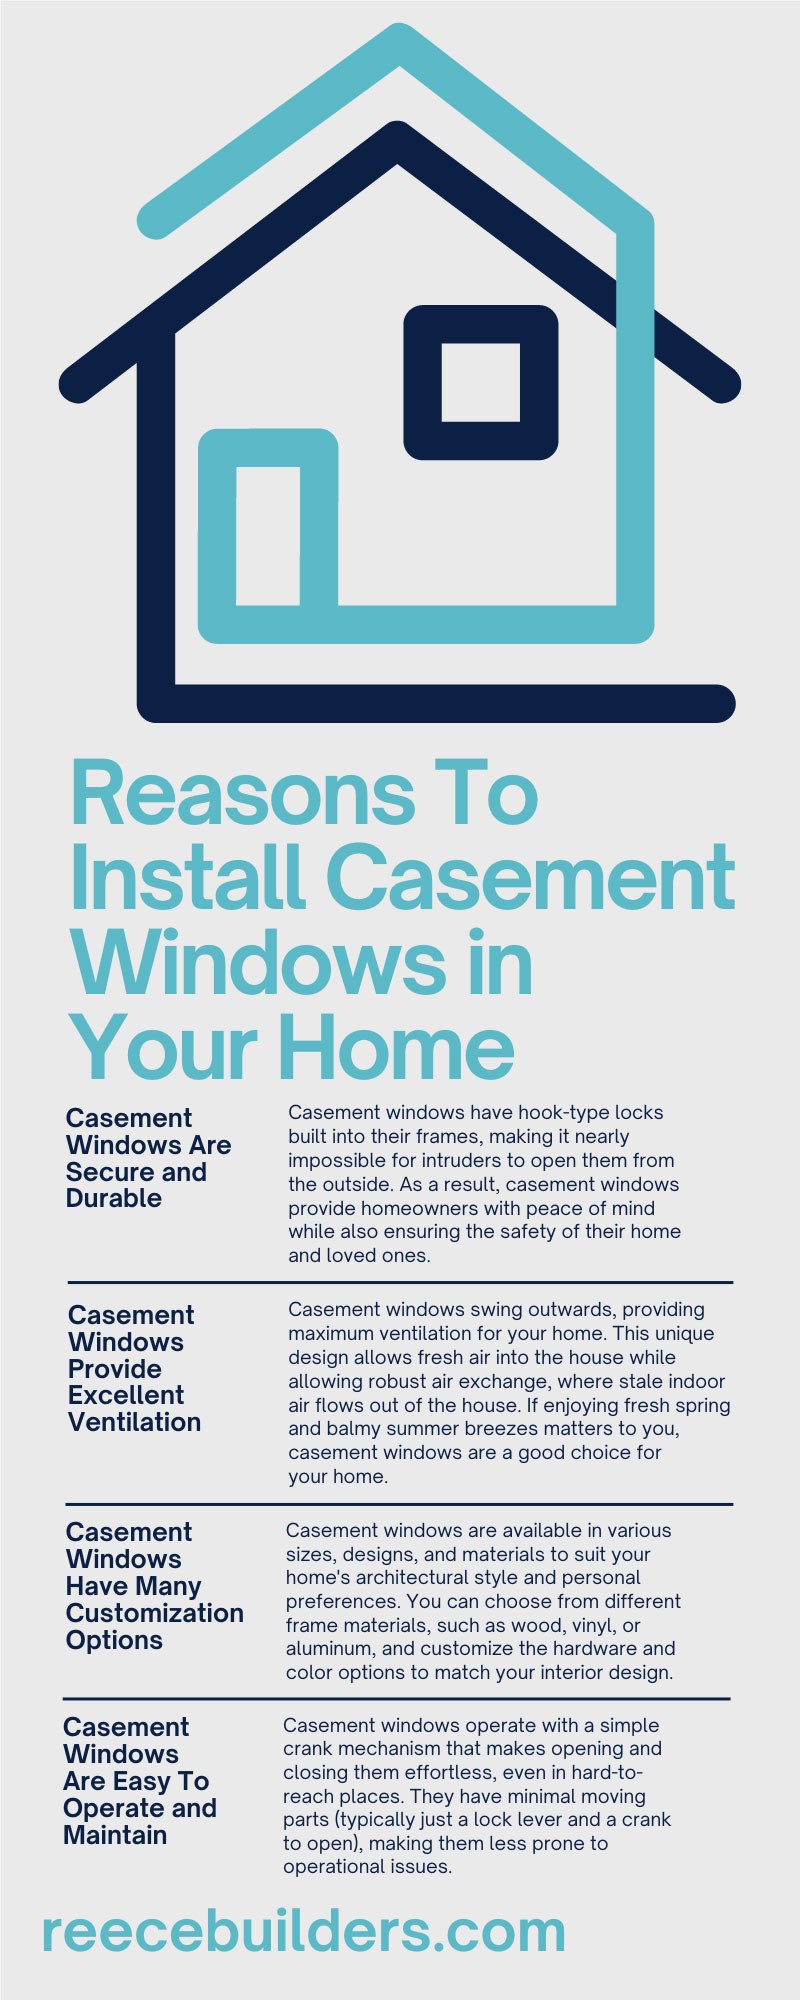 7 Reasons To Install Casement Windows in Your Home